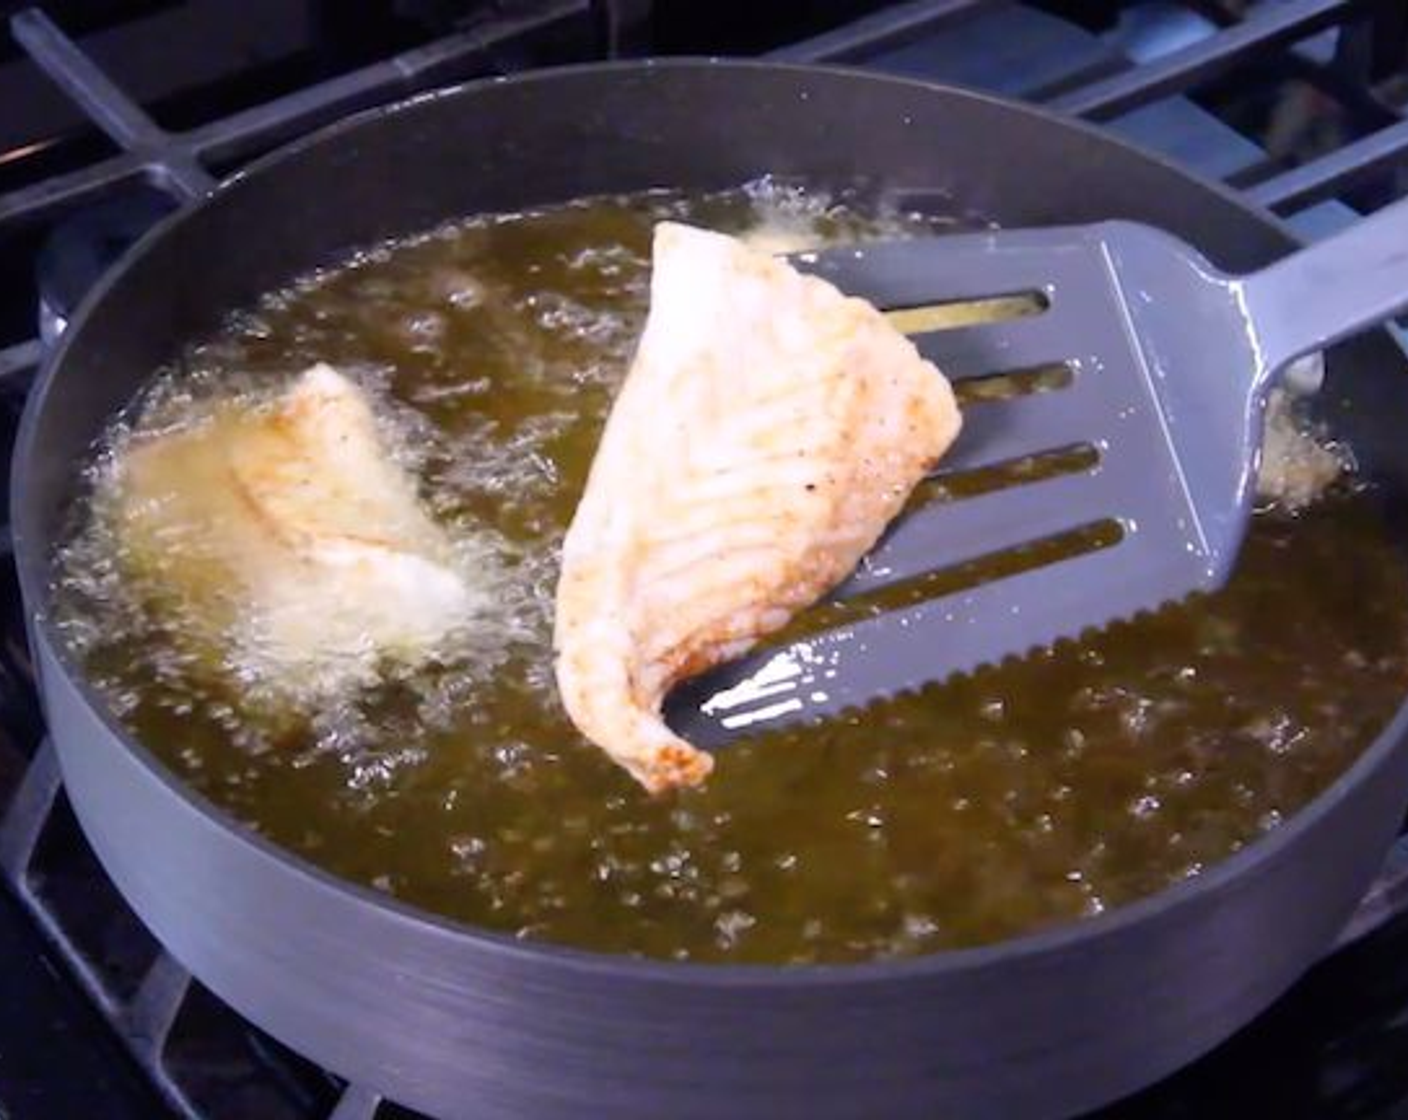 step 4 In a large nonstick pan over medium-high heat, heat Vegetable Oil (1/2 Tbsp). Remove the cod from the marinade and season both sides of each filet with Kosher Salt (to taste) and Freshly Ground Black Pepper (to taste). Place the fish on the pan, flesh side down. Cook until the fish is opaque and cooked through, 3 to 5 minutes per side. Let rest for about 5 minutes before flaking the fish with a fork.